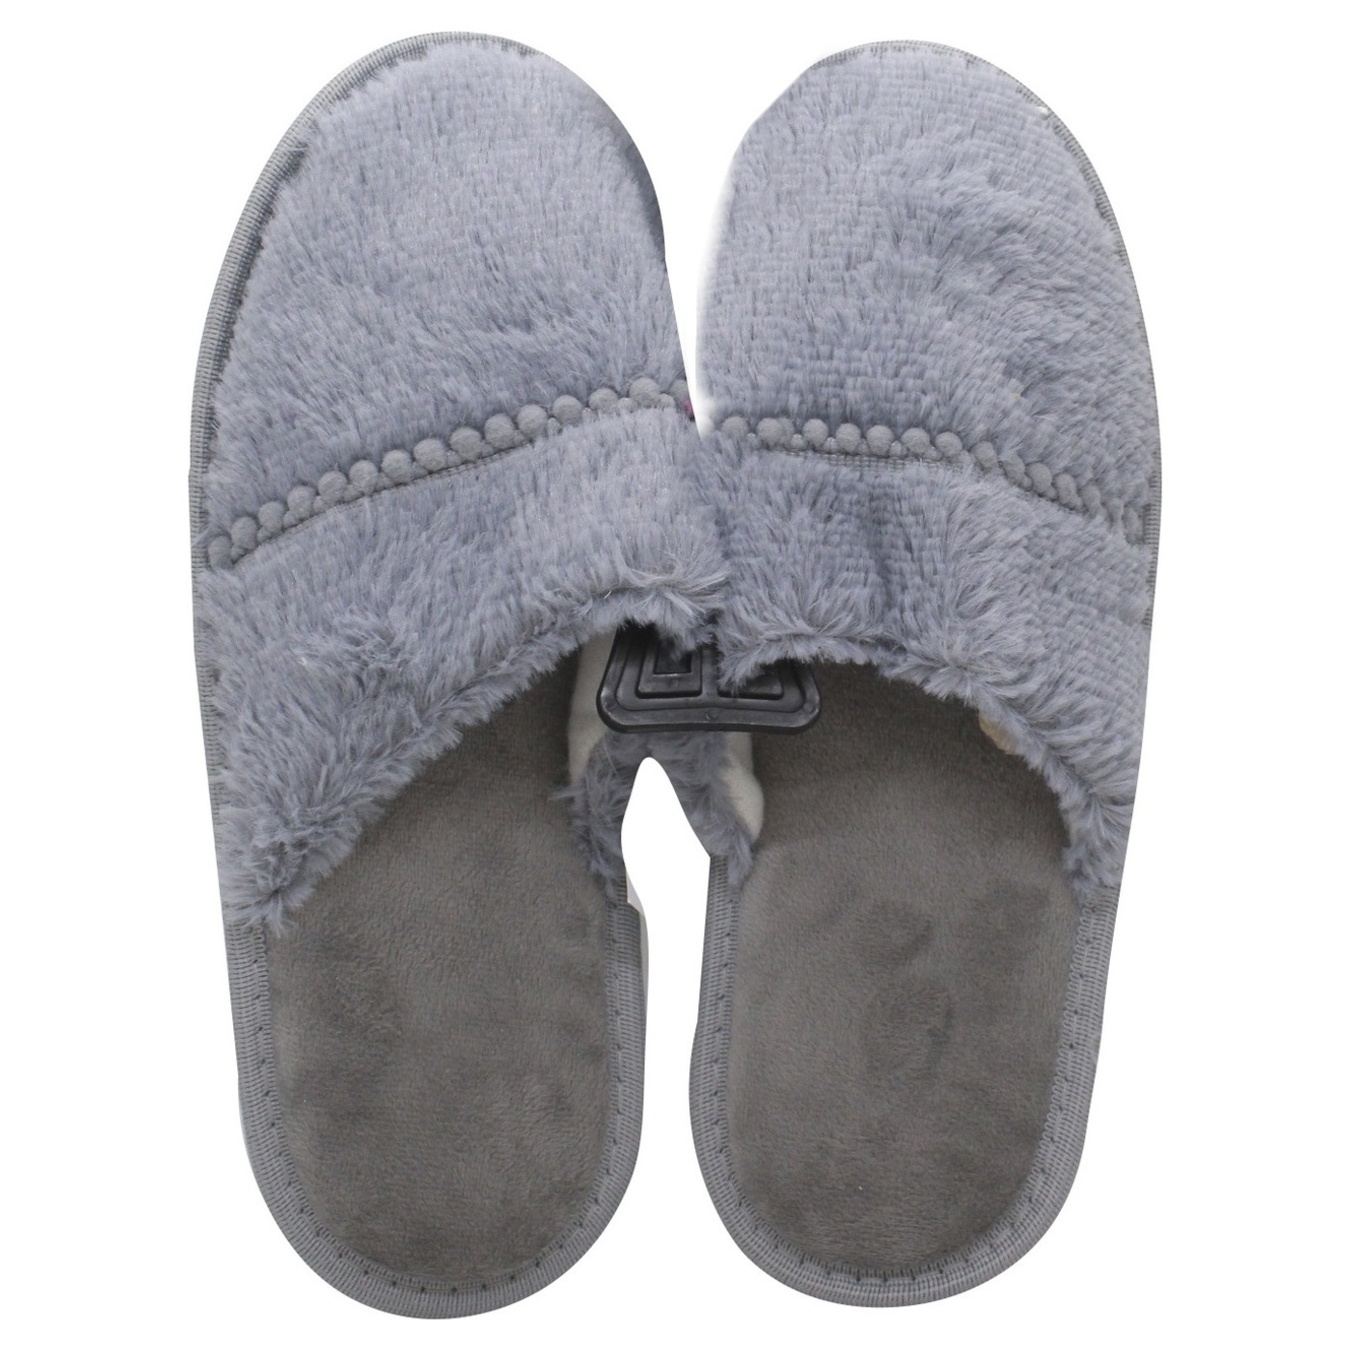 Aimon slippers for women in the pile assortment